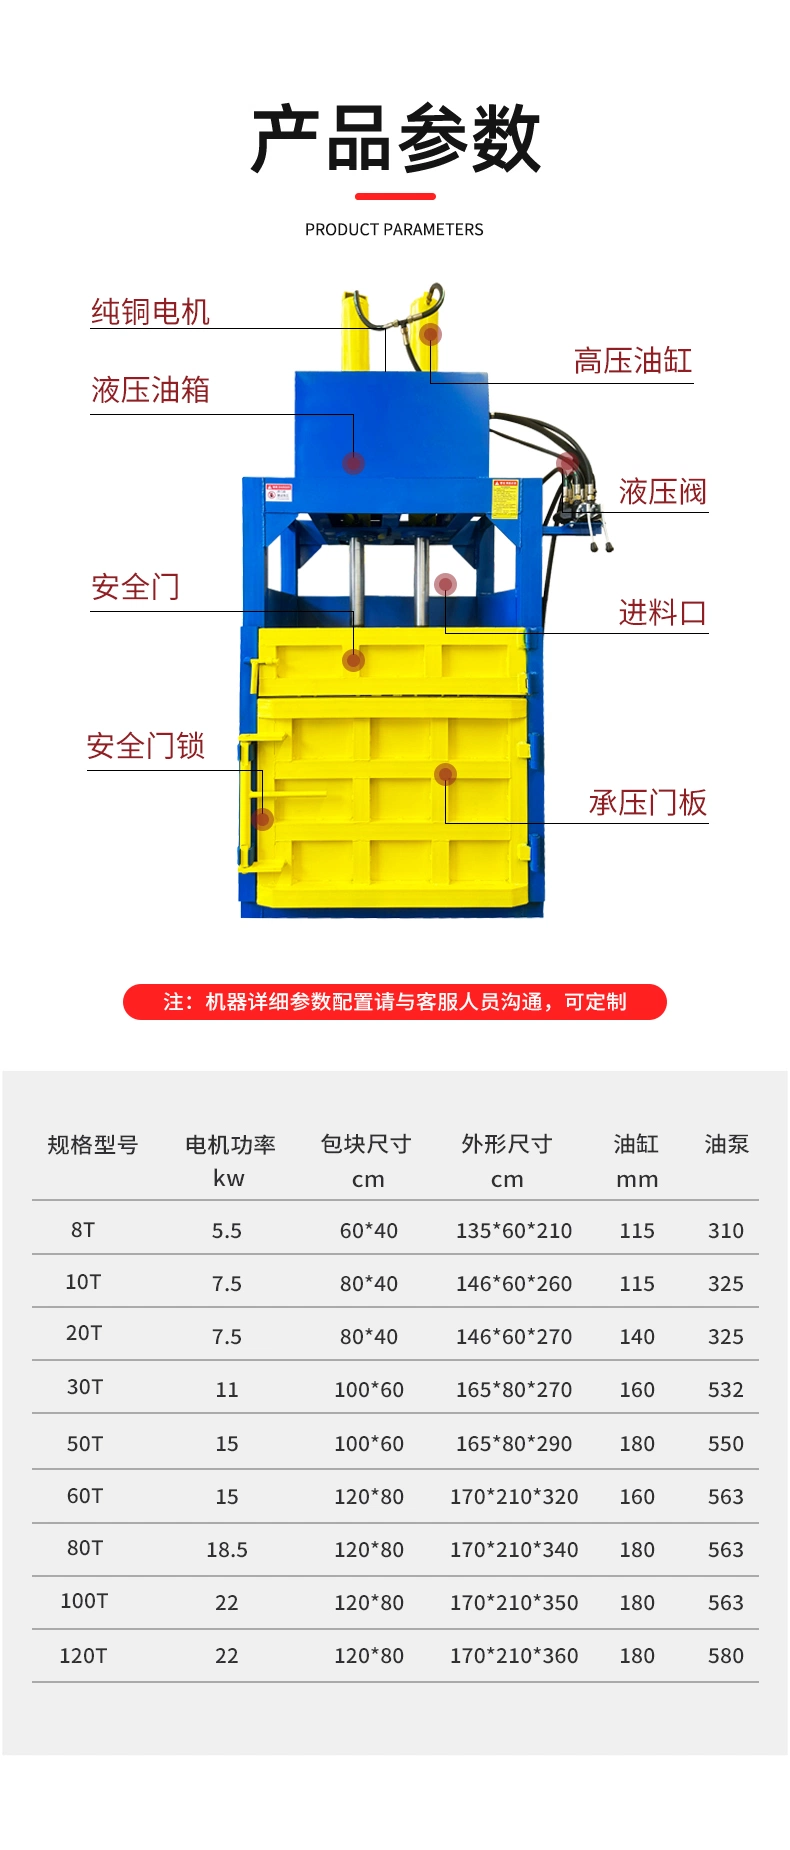 Hot Selling Factories Bale Machine Equipment for Recycling Materials Produced by Hydraulic Bale Press